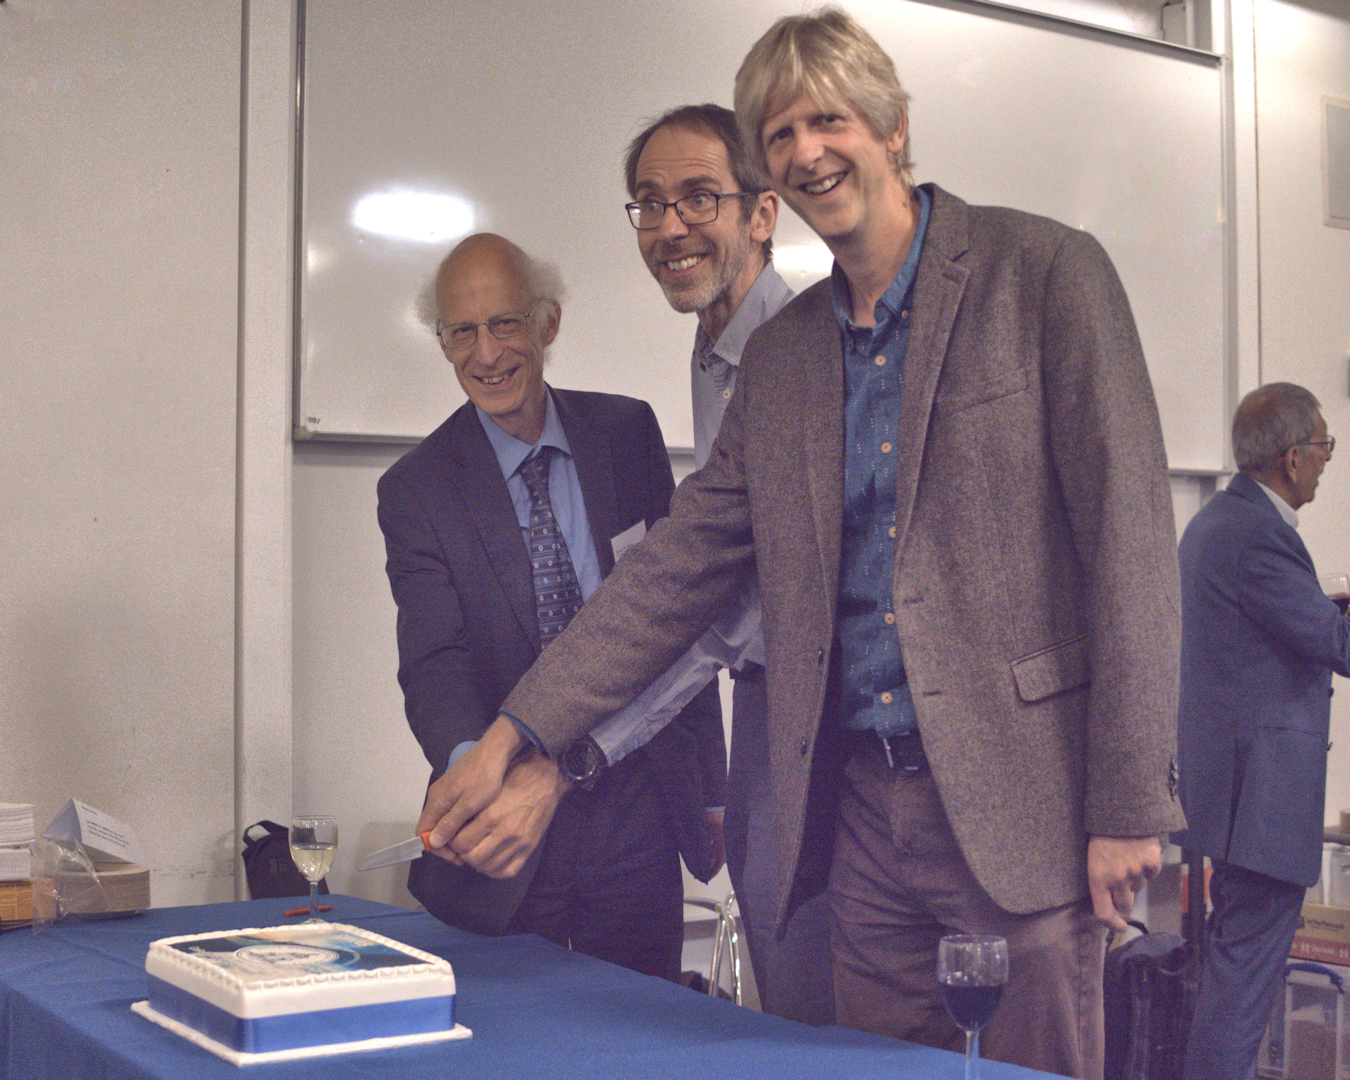 Cutting the cake at QJ 150th Anniversary Event